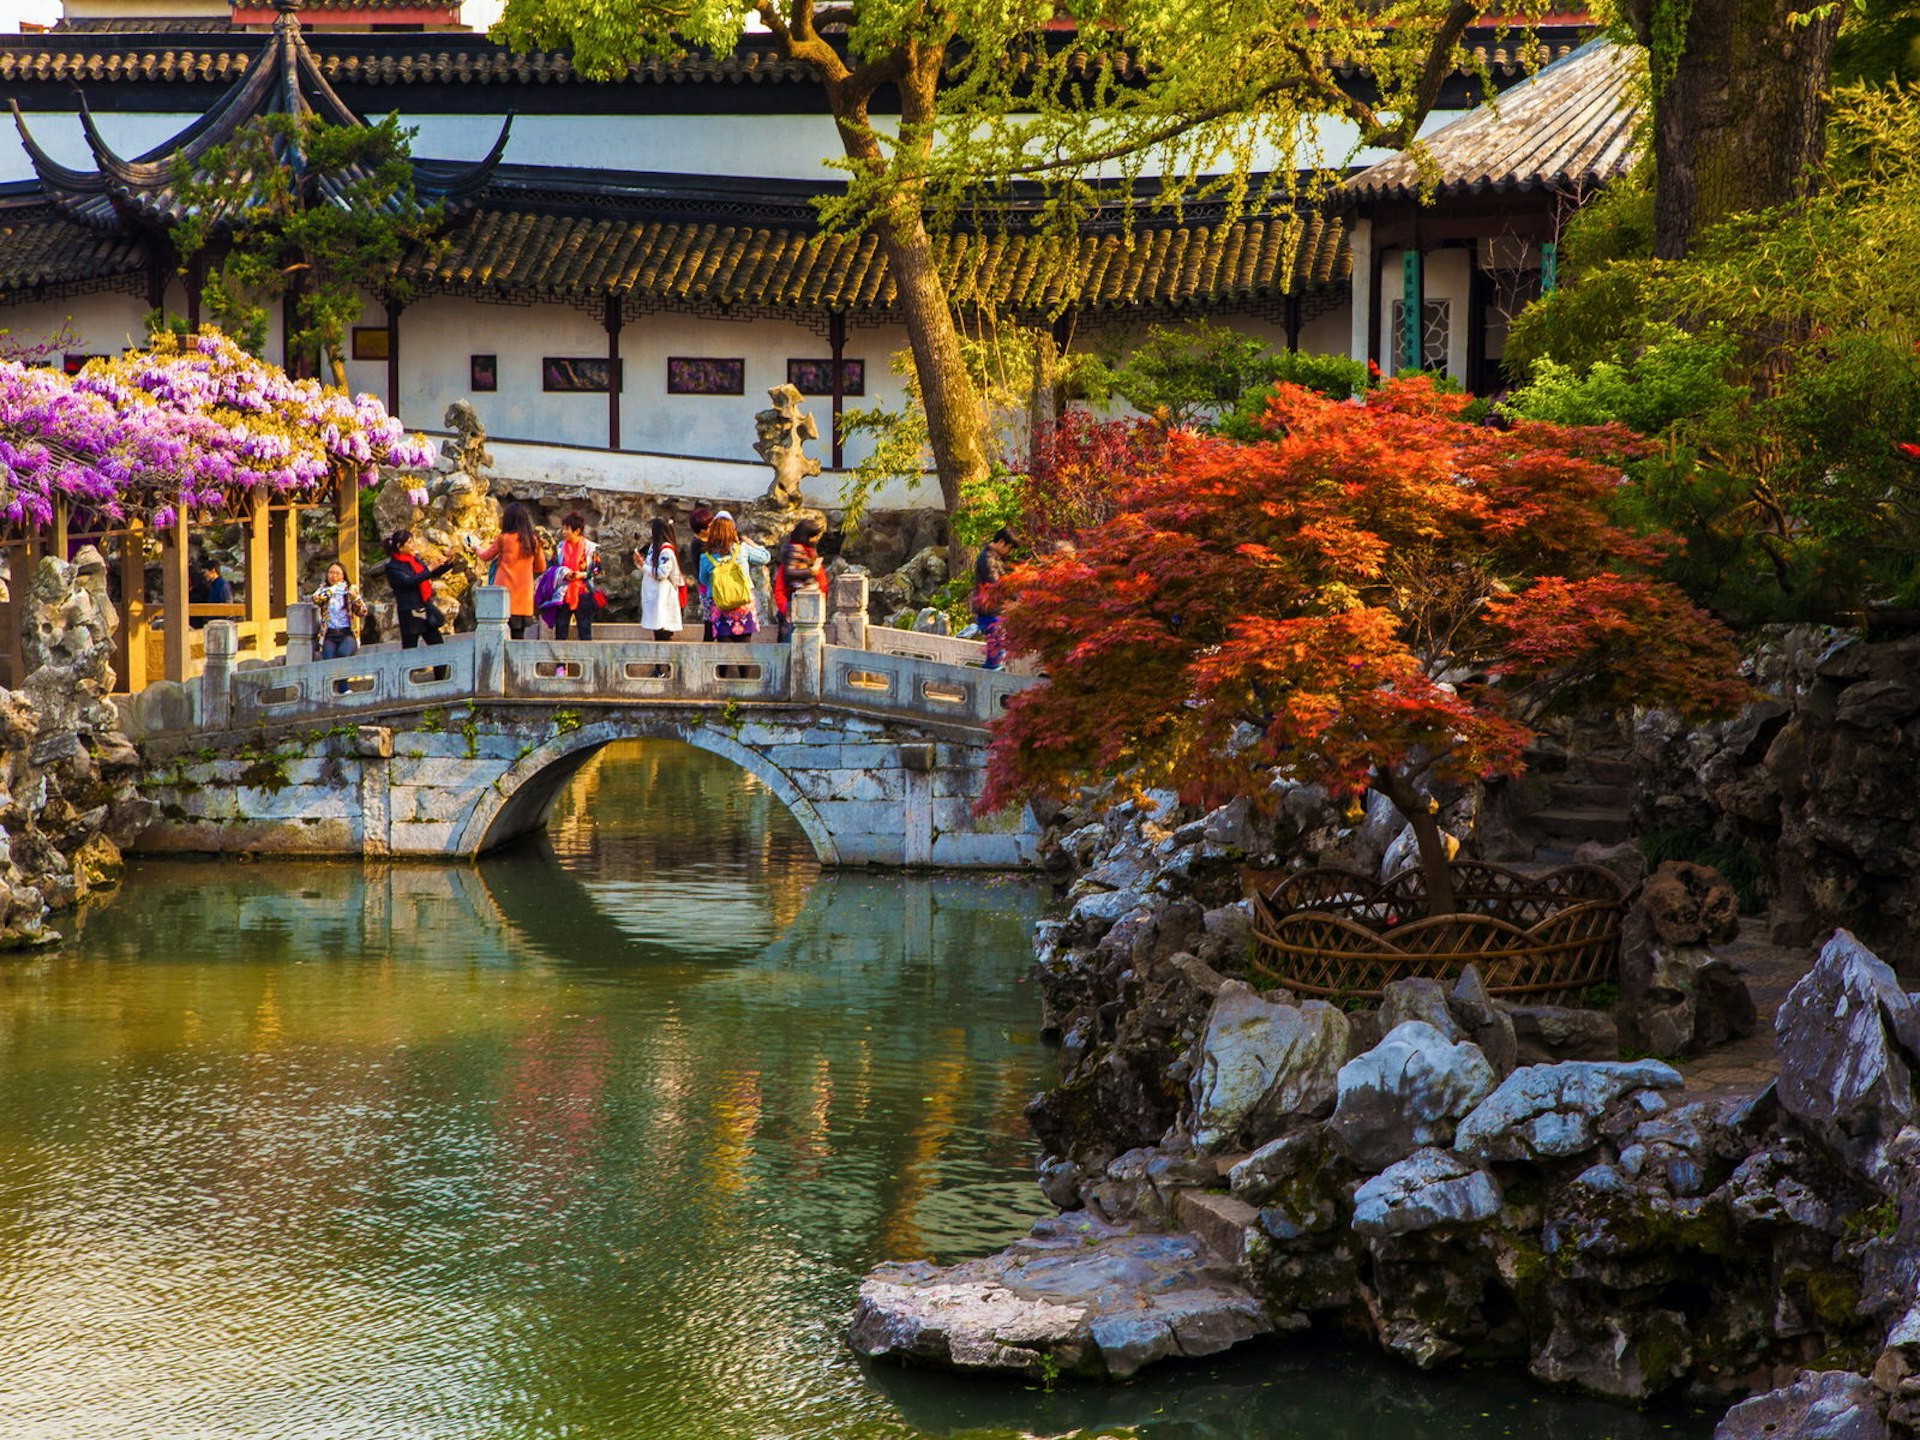 A pond with small stone bridge and covered walkway in the background, framed by red-leafed trees. Classical Chinese landscape architecture – marked by pavilions, covered walkways, rock features and ponds – was developed in Suzhou © Meiqianbao / Shutterstock